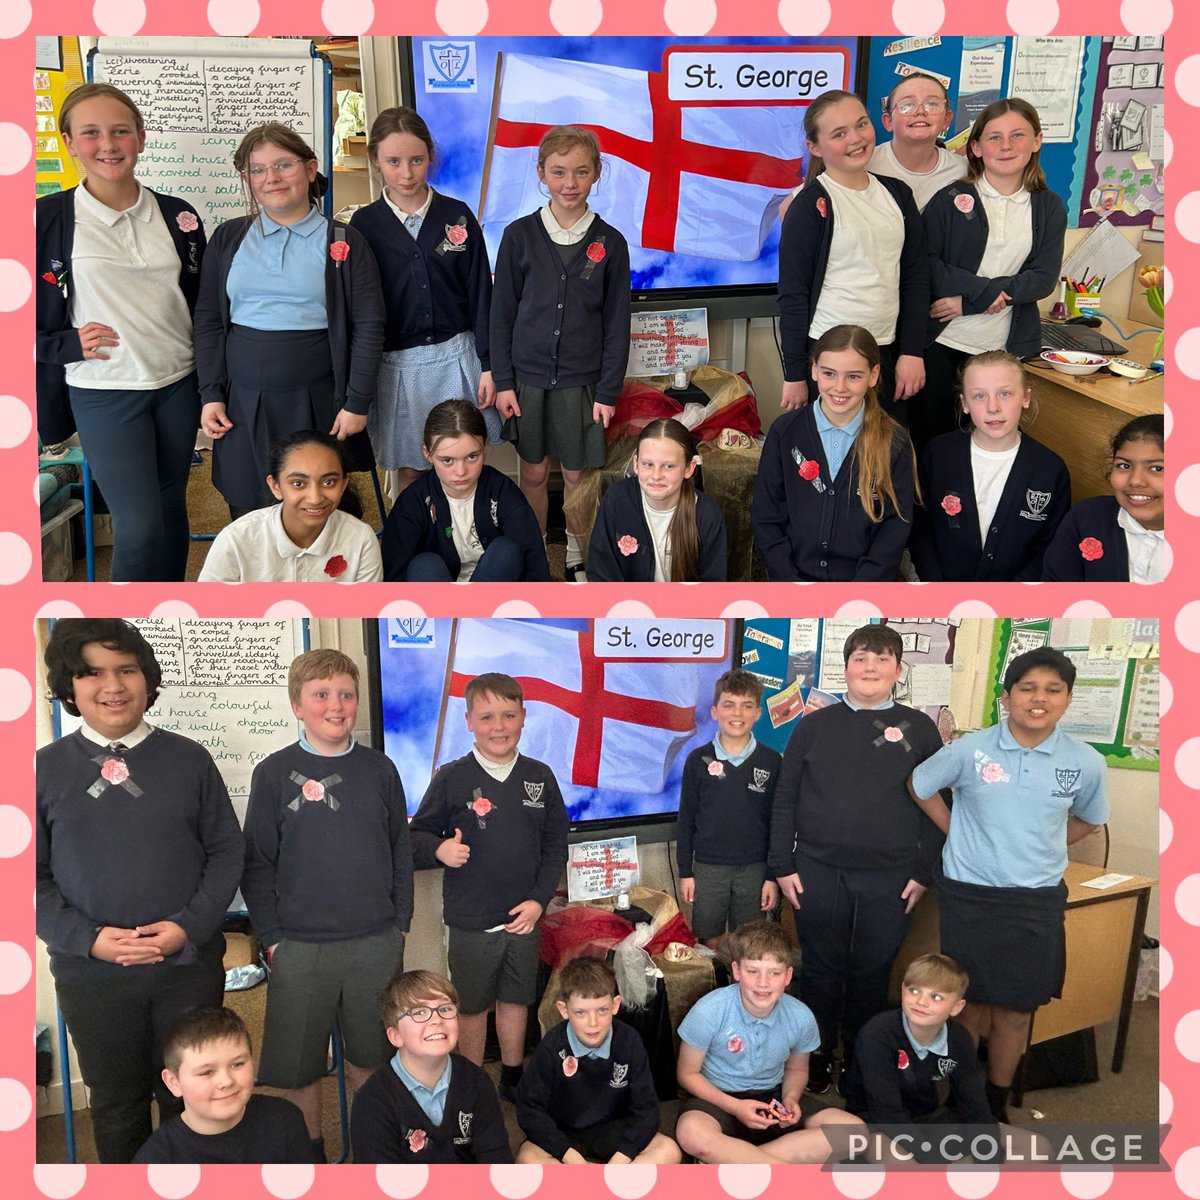 We celebrated St. George’s Day today with a special time in Prayer and Liturgy, thinking about how brave St. George was and how God will always look after us. The children described how this made them feel - special, safe and loved. 🏴󠁧󠁢󠁥󠁮󠁧󠁿♥️🤍 #MakeADifference @ololprimary_HT